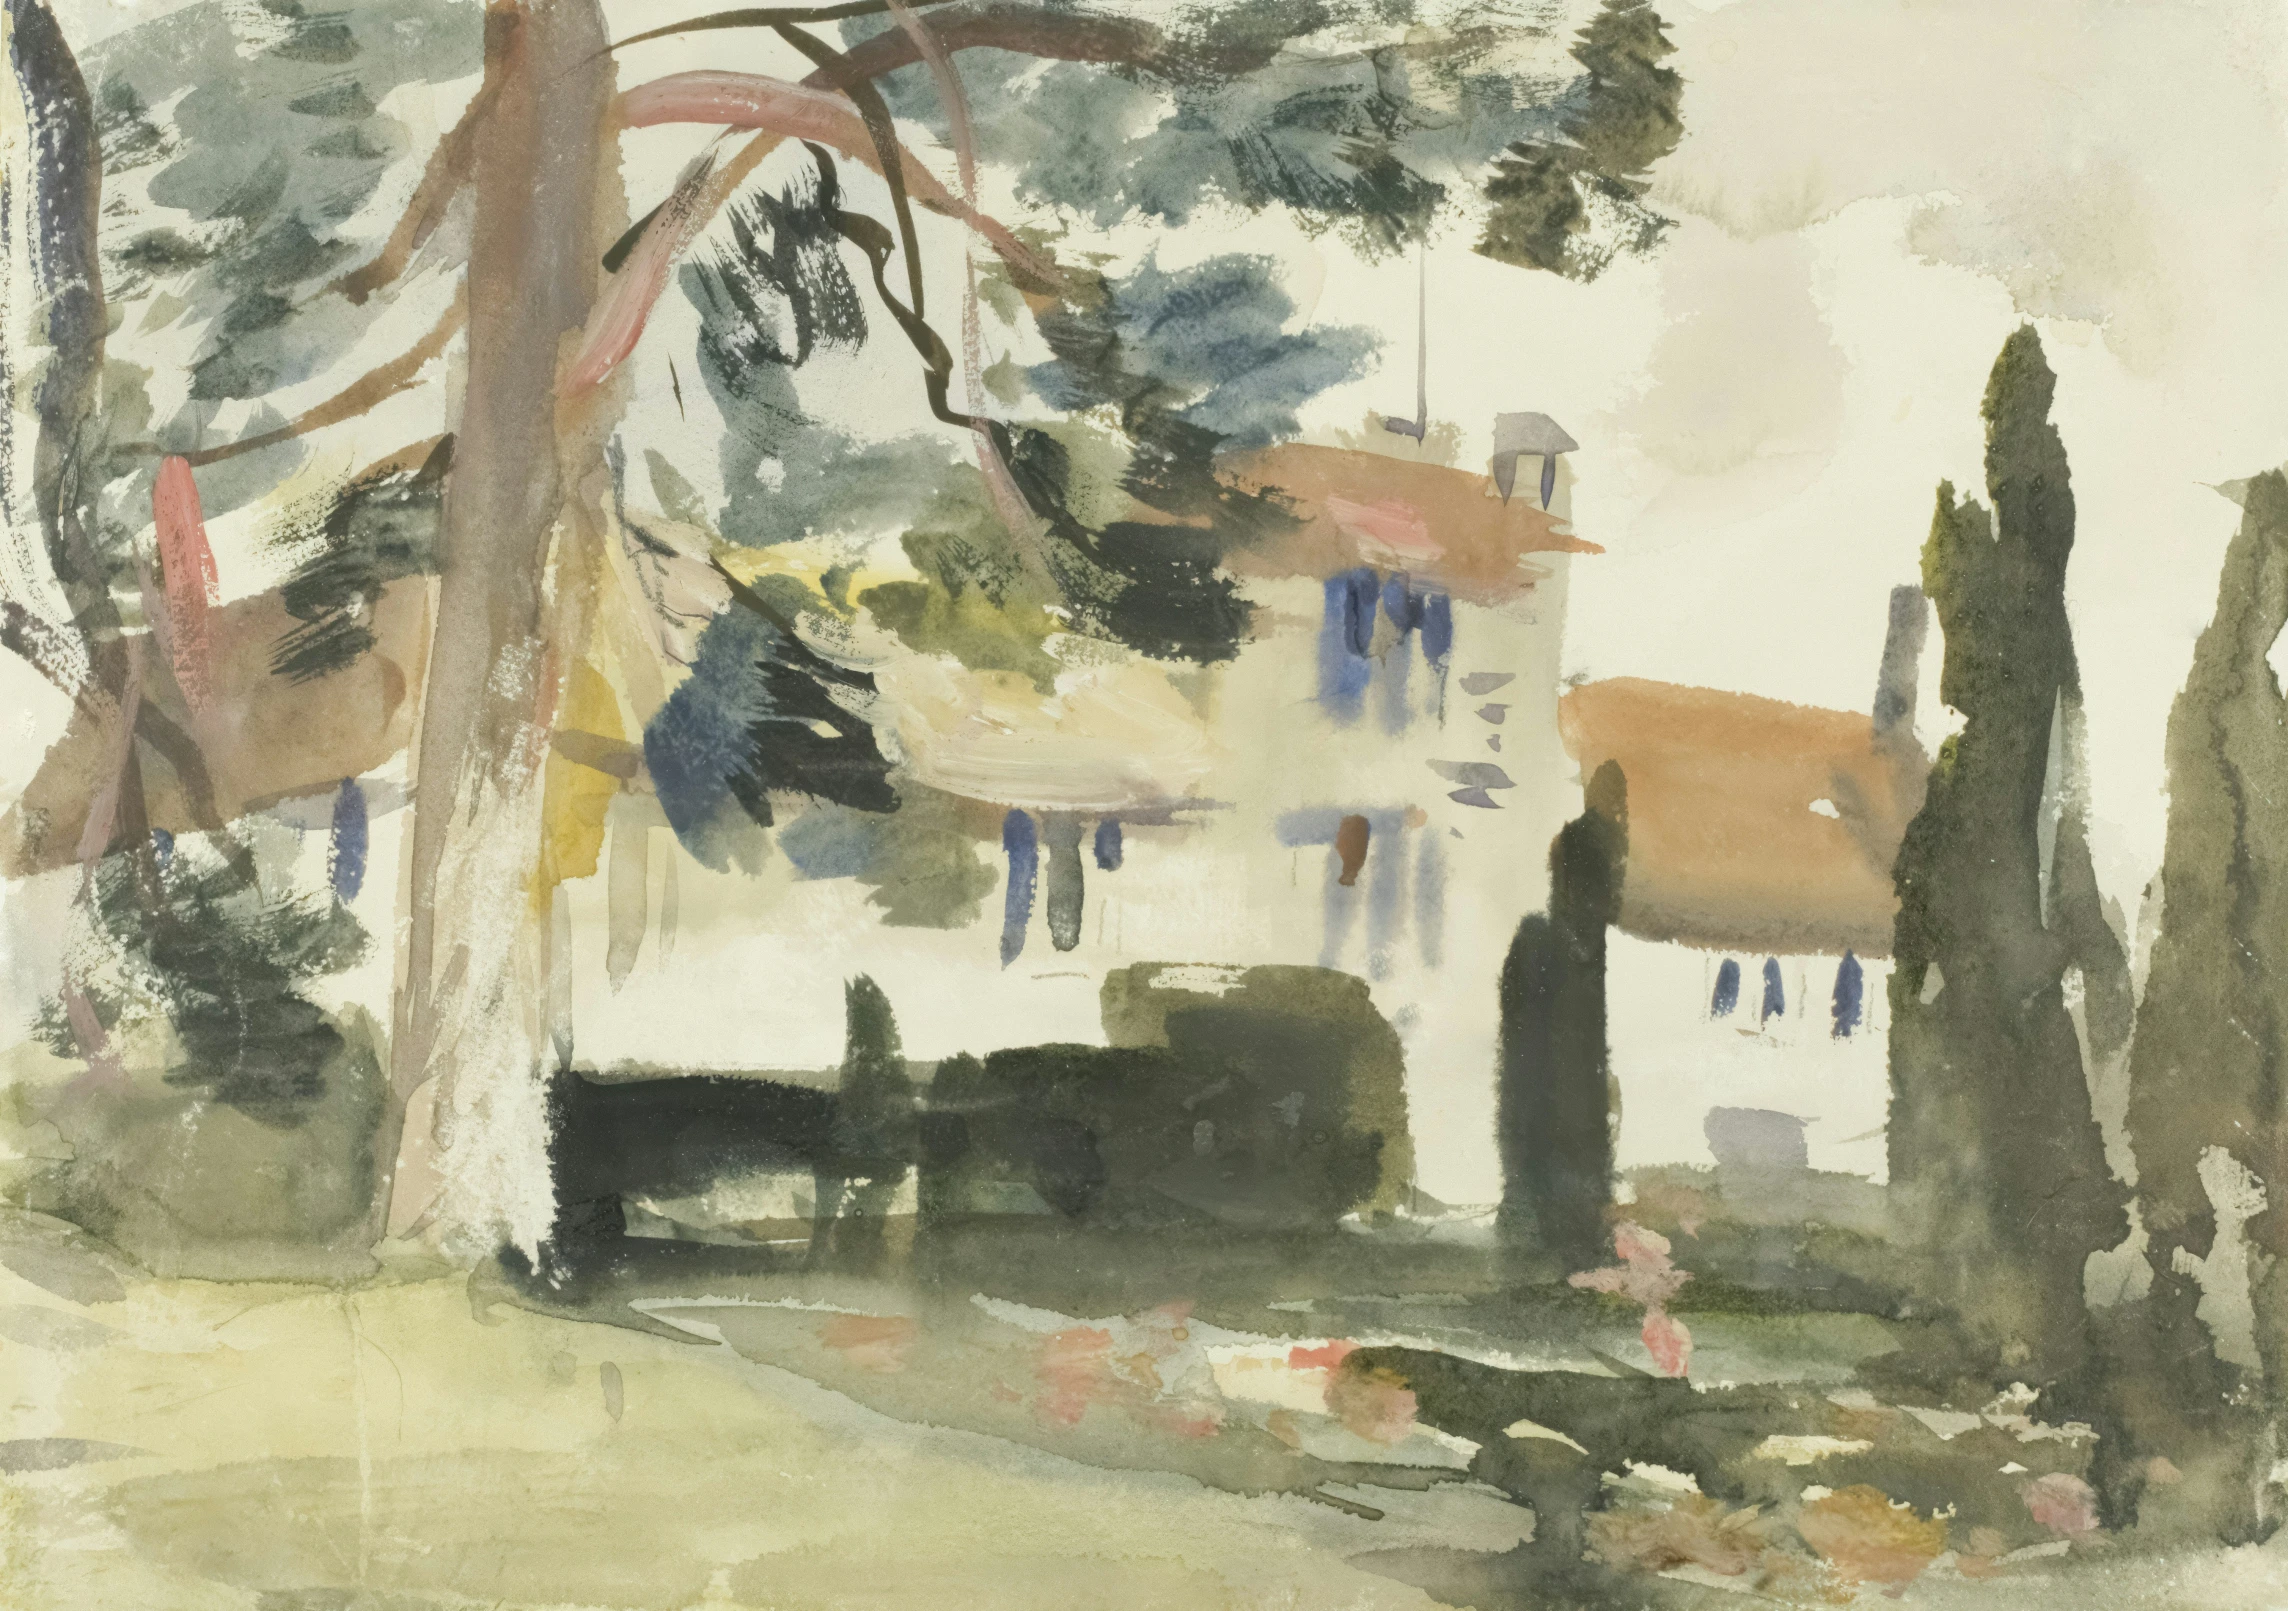 a painting on paper shows an old house in the background